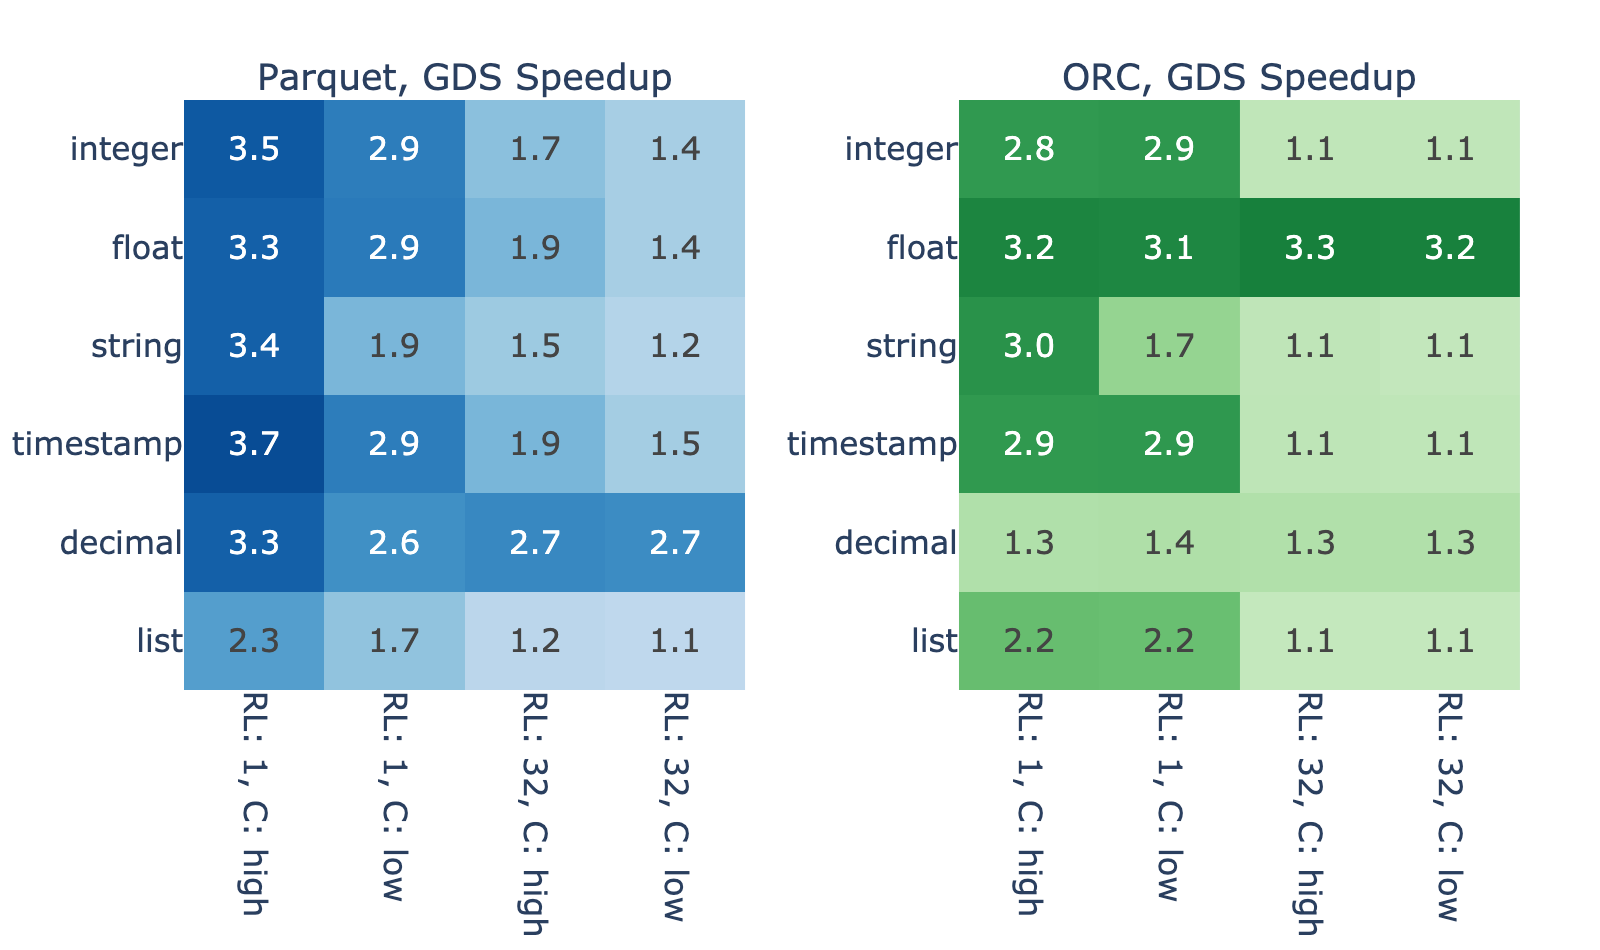 Tables show the relative speedup due to GDS when reading Parquet (left) and ORC (right) files. Each row shows the speedup for a different group of data types, and columns show speedups for different combinations of run length and cardinality. The values in the table vary greatly, between 1.1 and 3.7.